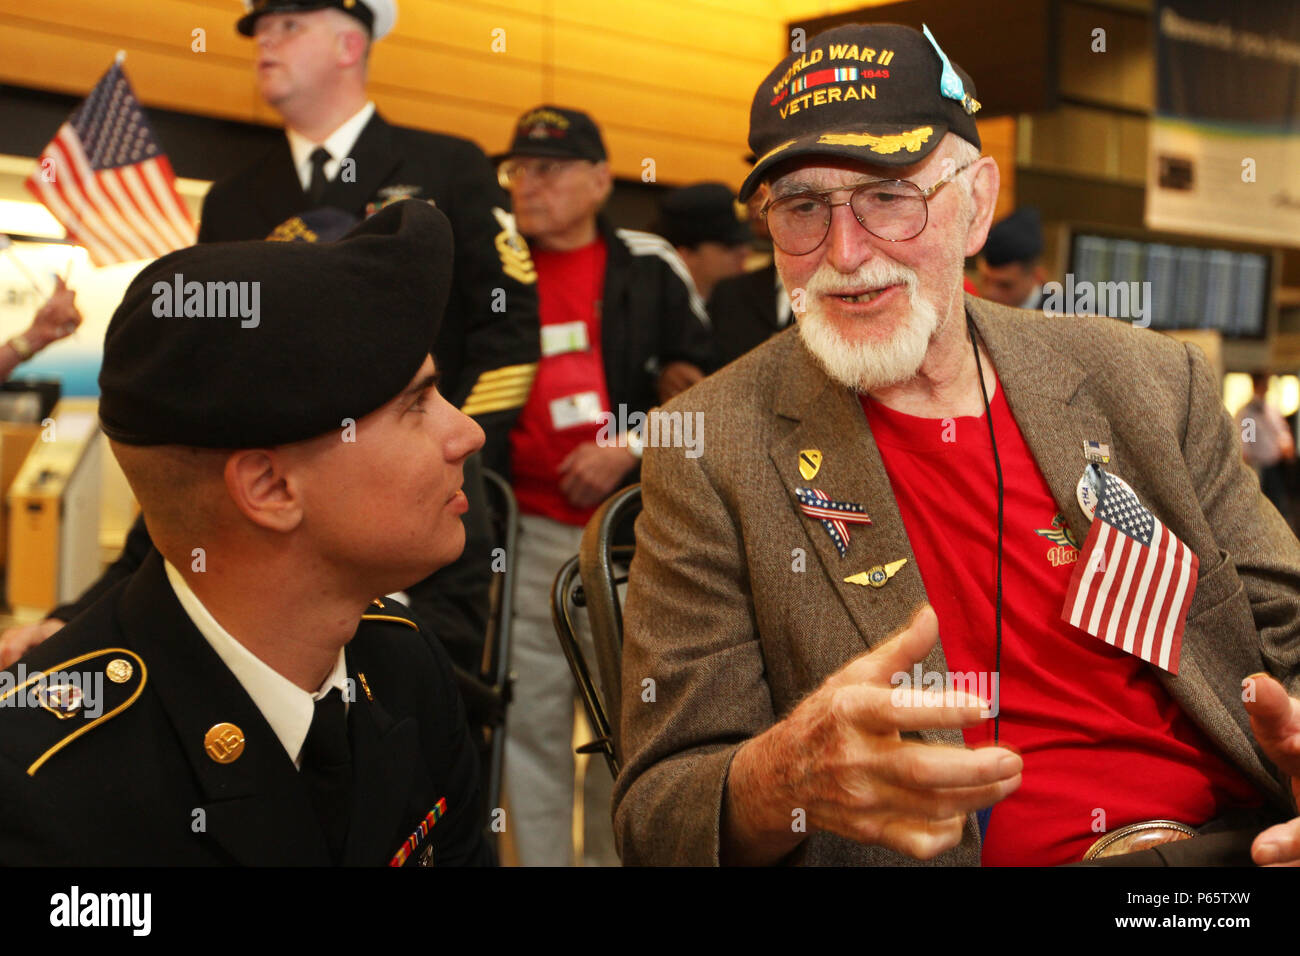 Spc. Paul Kelley, Headquarters and Headquarters Battalion, I Corps, talks with a World War II veteran at Seattle-Tacoma International Airport as part of an Honor Flight May 9. A group of veterans returned from a trip to Washington D.C. to visit memorials honoring their sacrifices. The Honor Flight Network has flown nearly 160,000 veterans to Washington D.C. since 2005. (U.S Army photo by Staff Sgt. Steven Schneider, 5th MPAD) Stock Photo